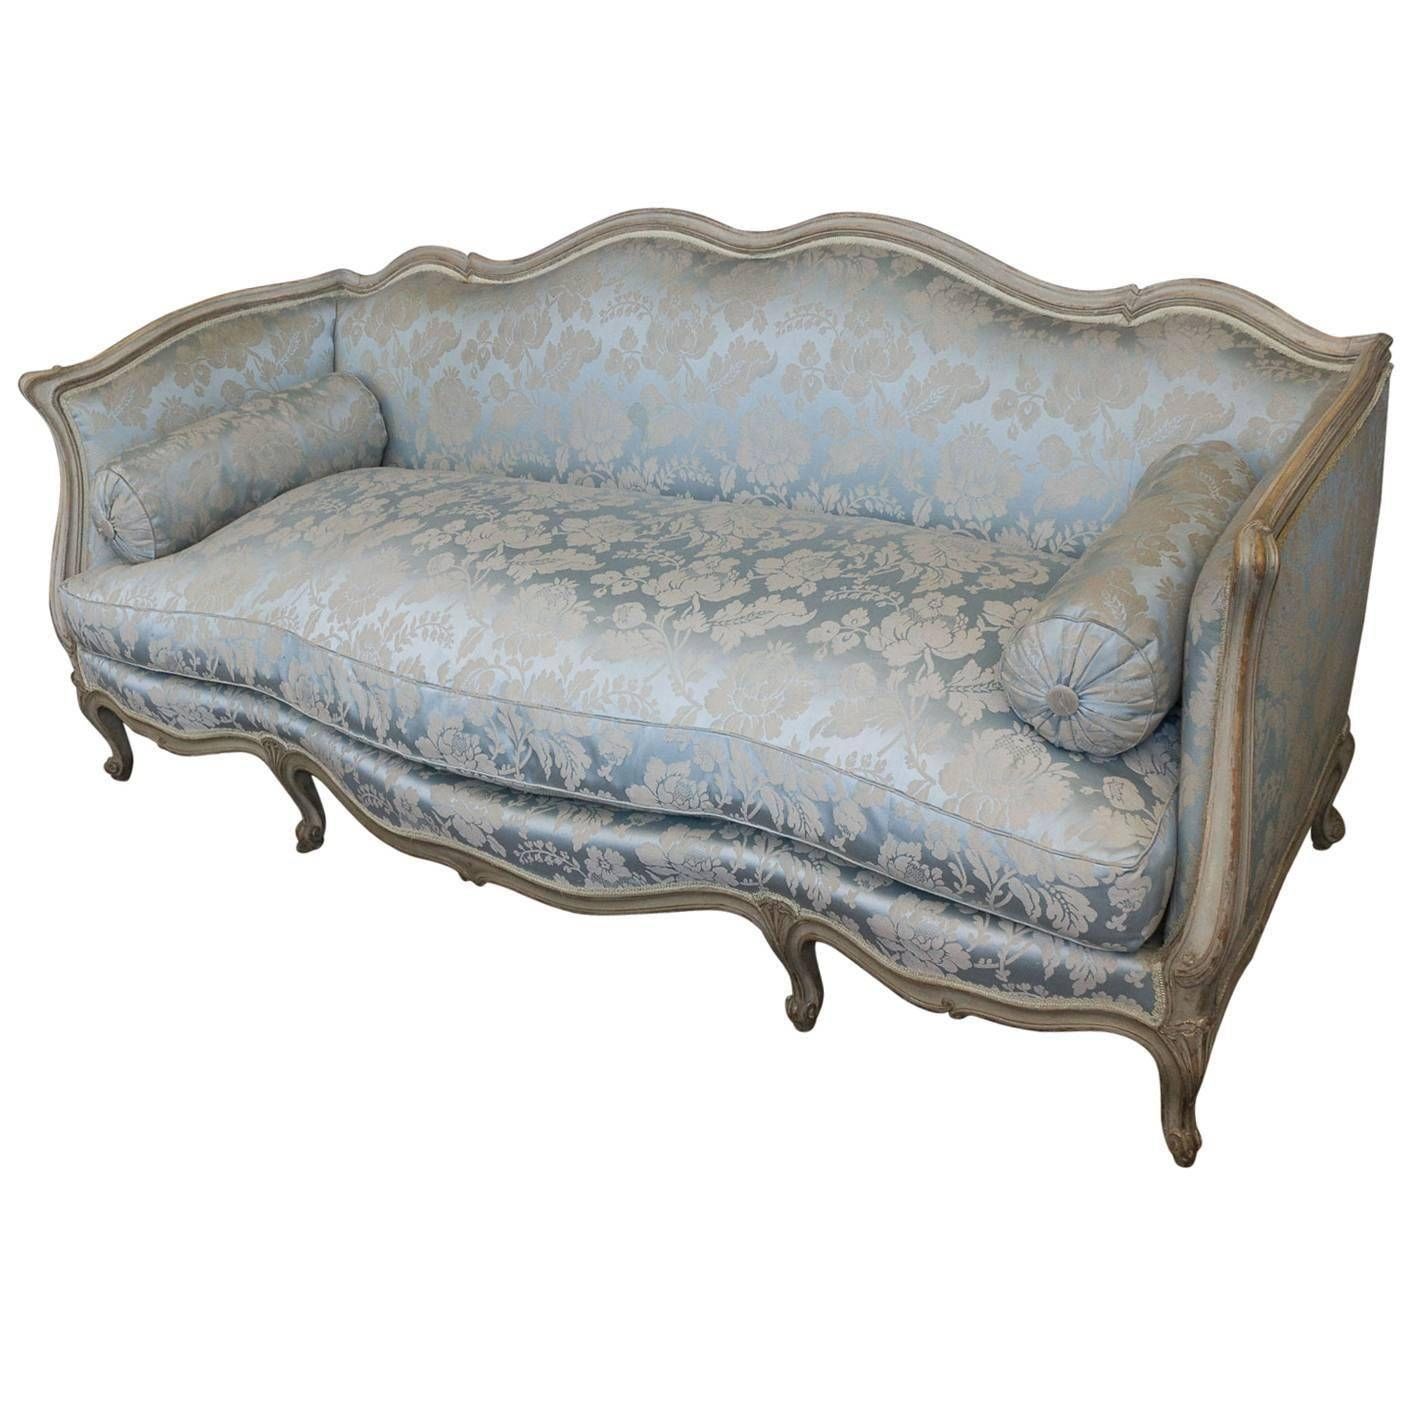 French Louis Xv Style Sofa For Sale At 1stdibs Regarding French Style Sofas (Photo 8 of 25)